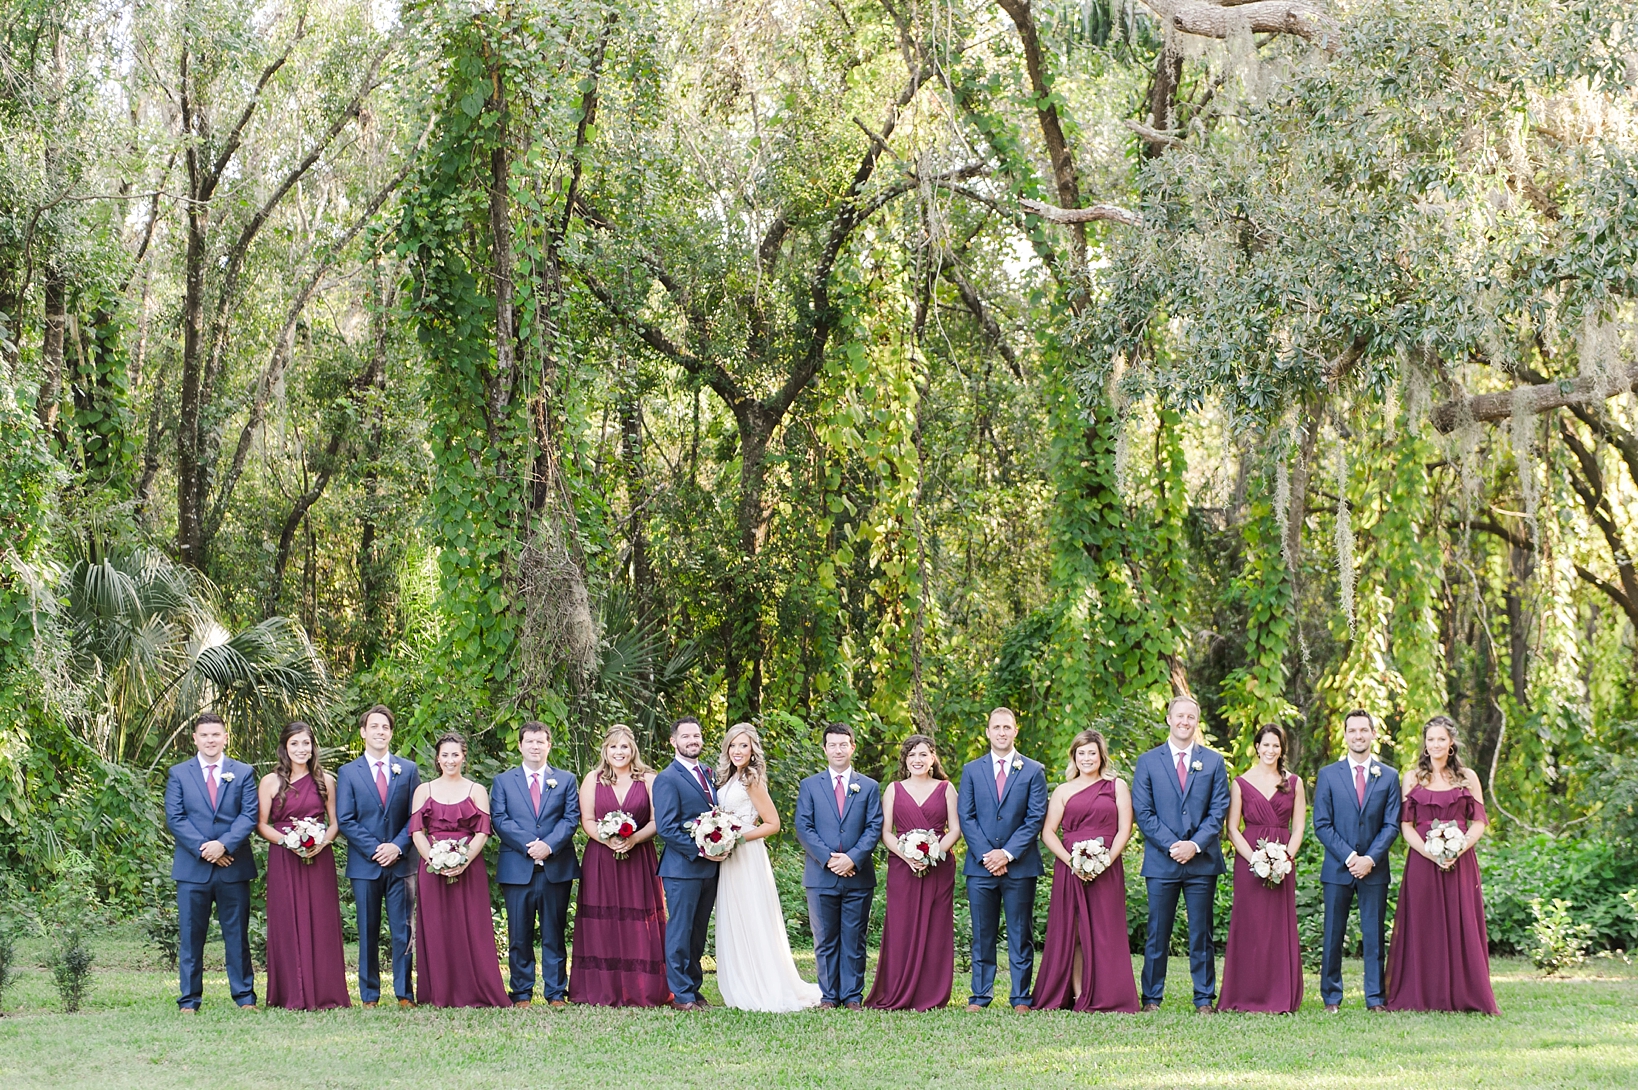 The entire wedding party wearing blue and merlot colors against a greenery-filled back ground